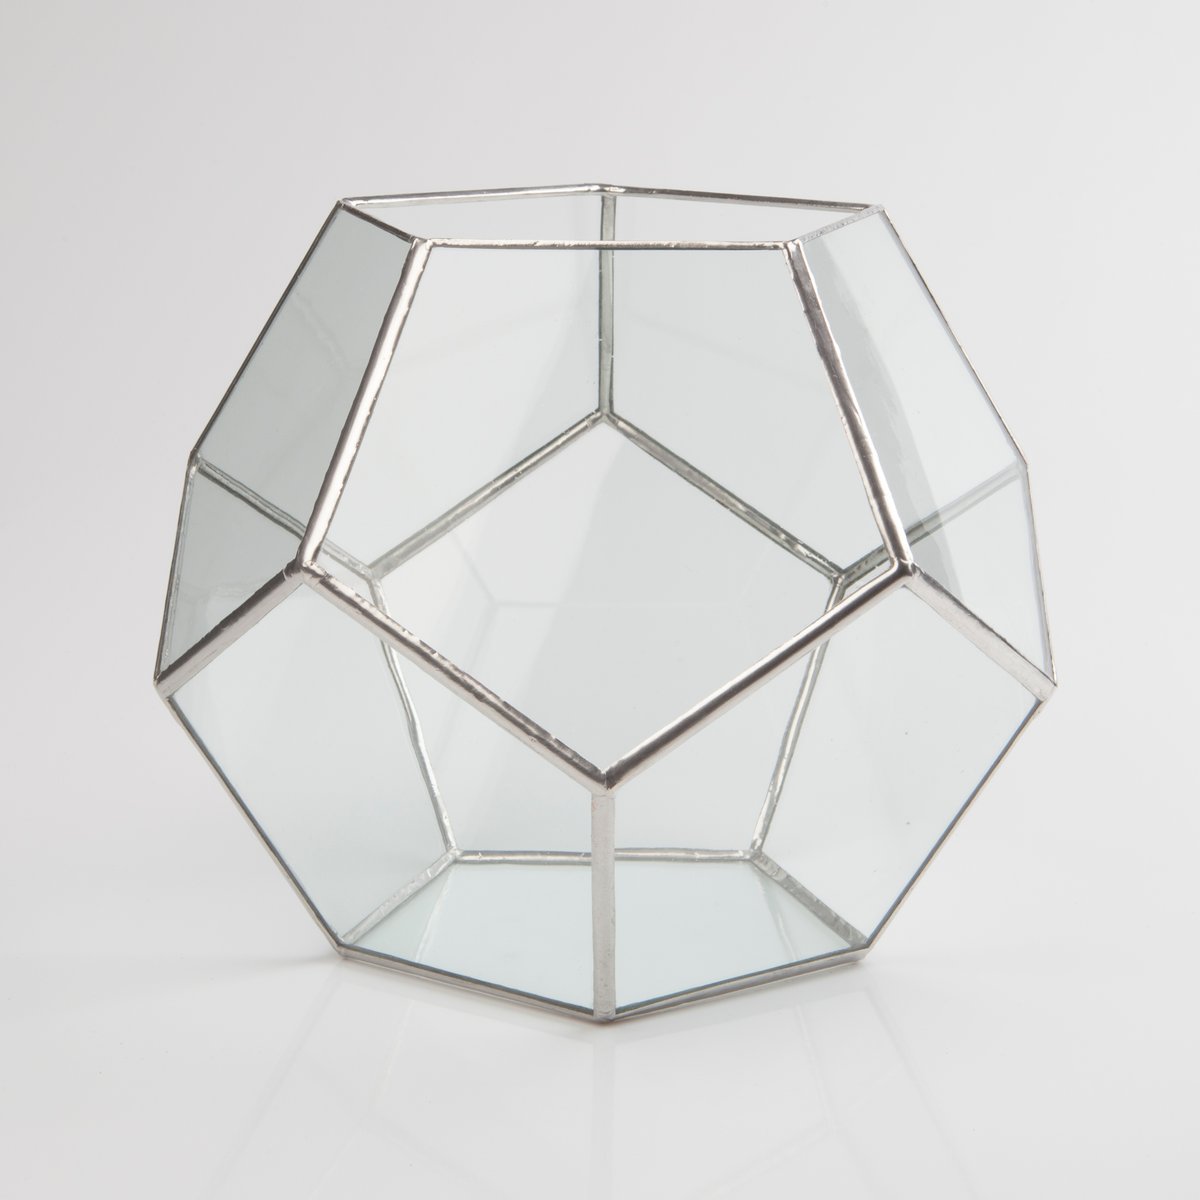 Image of Large Dodecahedron Terrarium